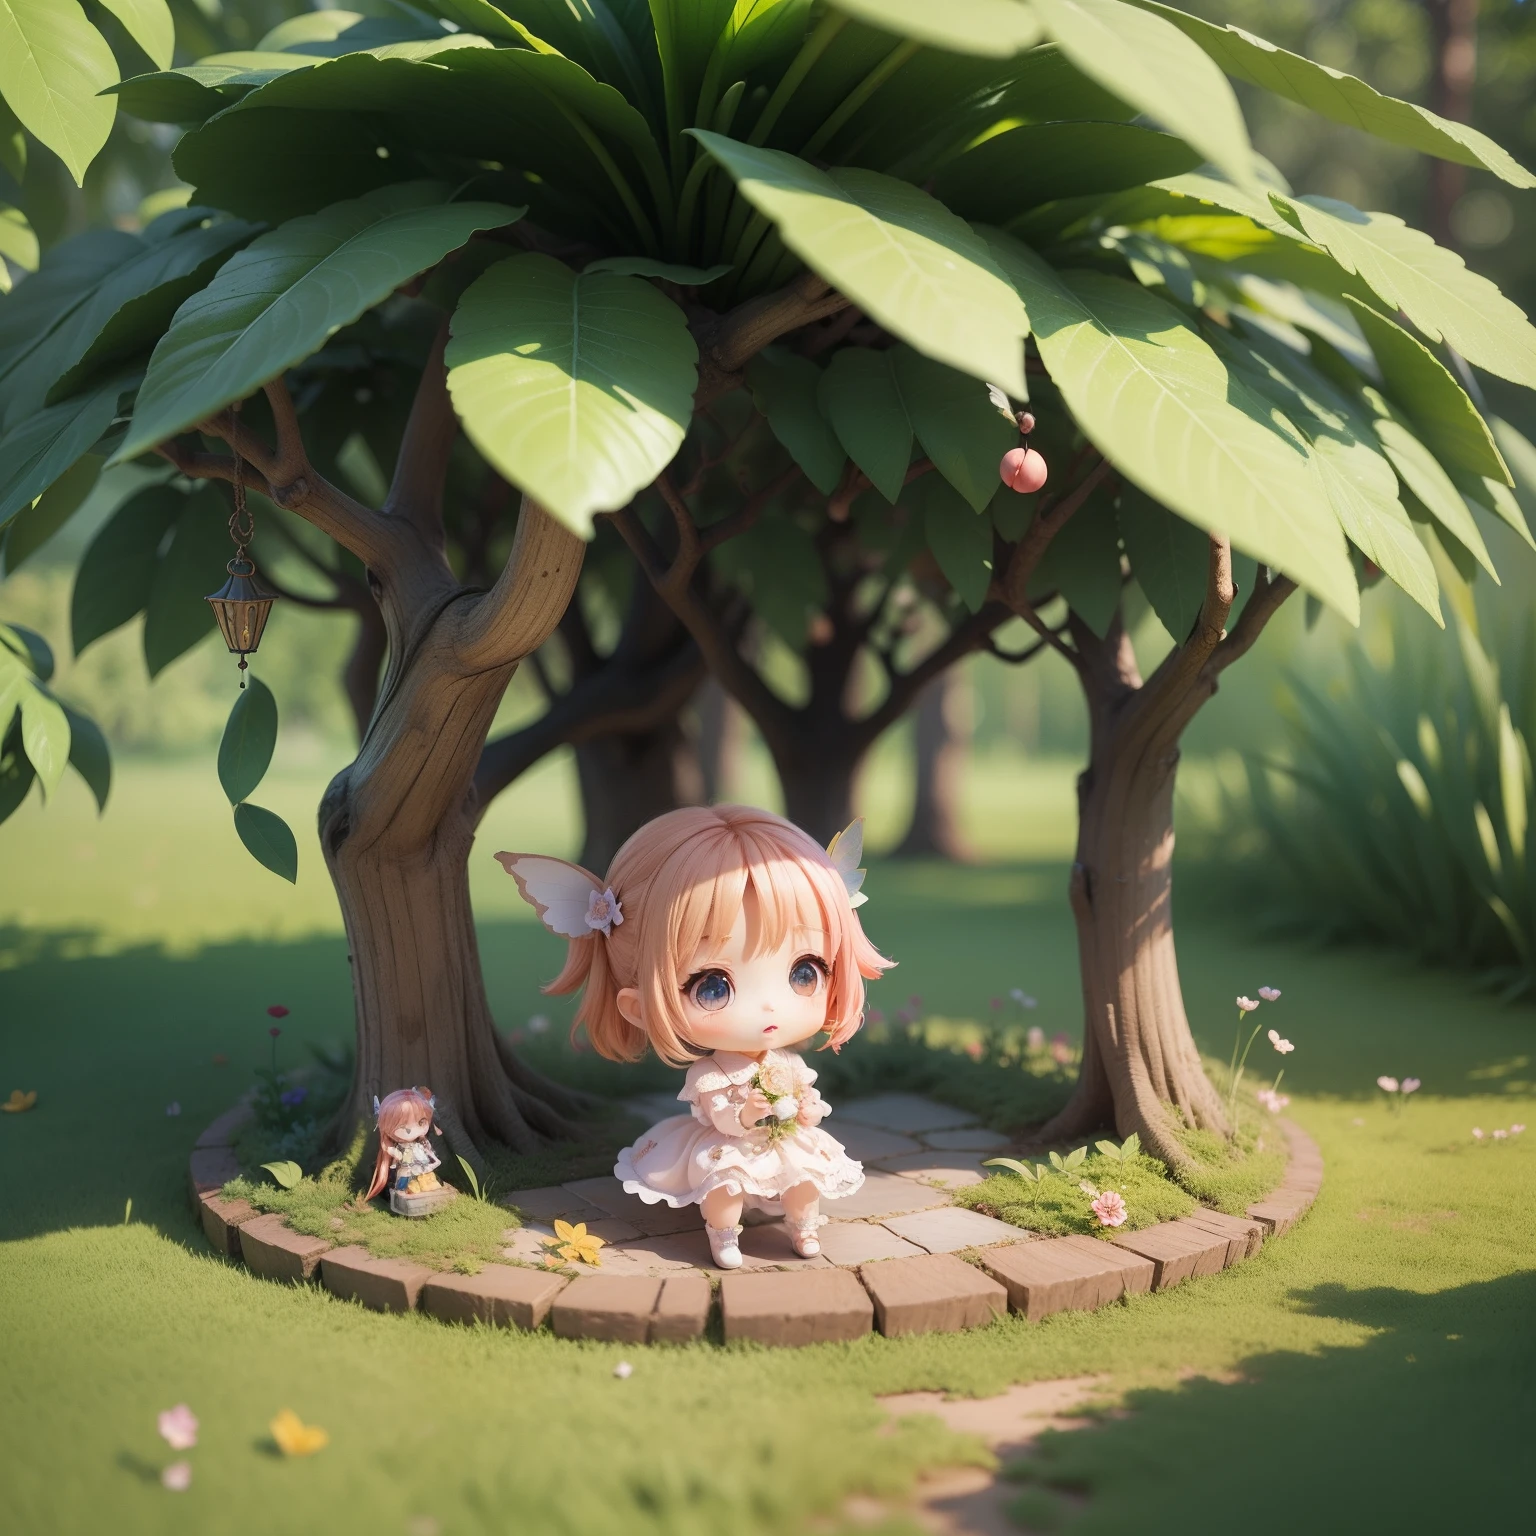 Cute Baby Chibi Anime,(((chibi3d))) (best quality) (masterprice)、Chibi Fairy、Fairytale Forest、Shelter from the rain with large leaves、Looking up